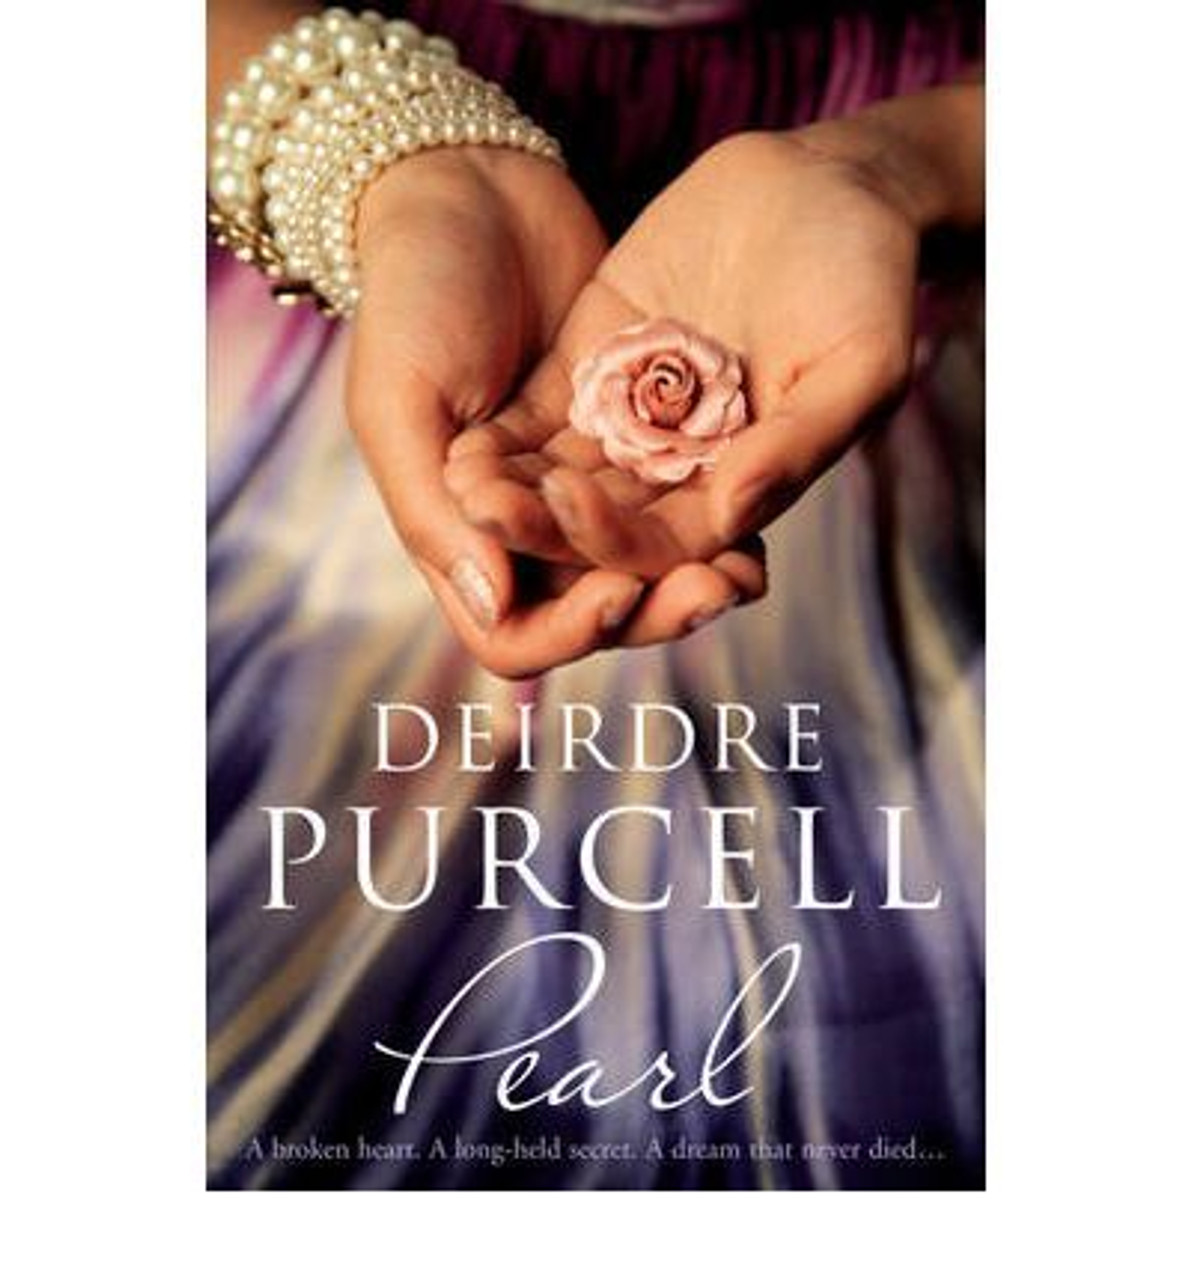 Deirdre Purcell / Pearl (Large Paperback)